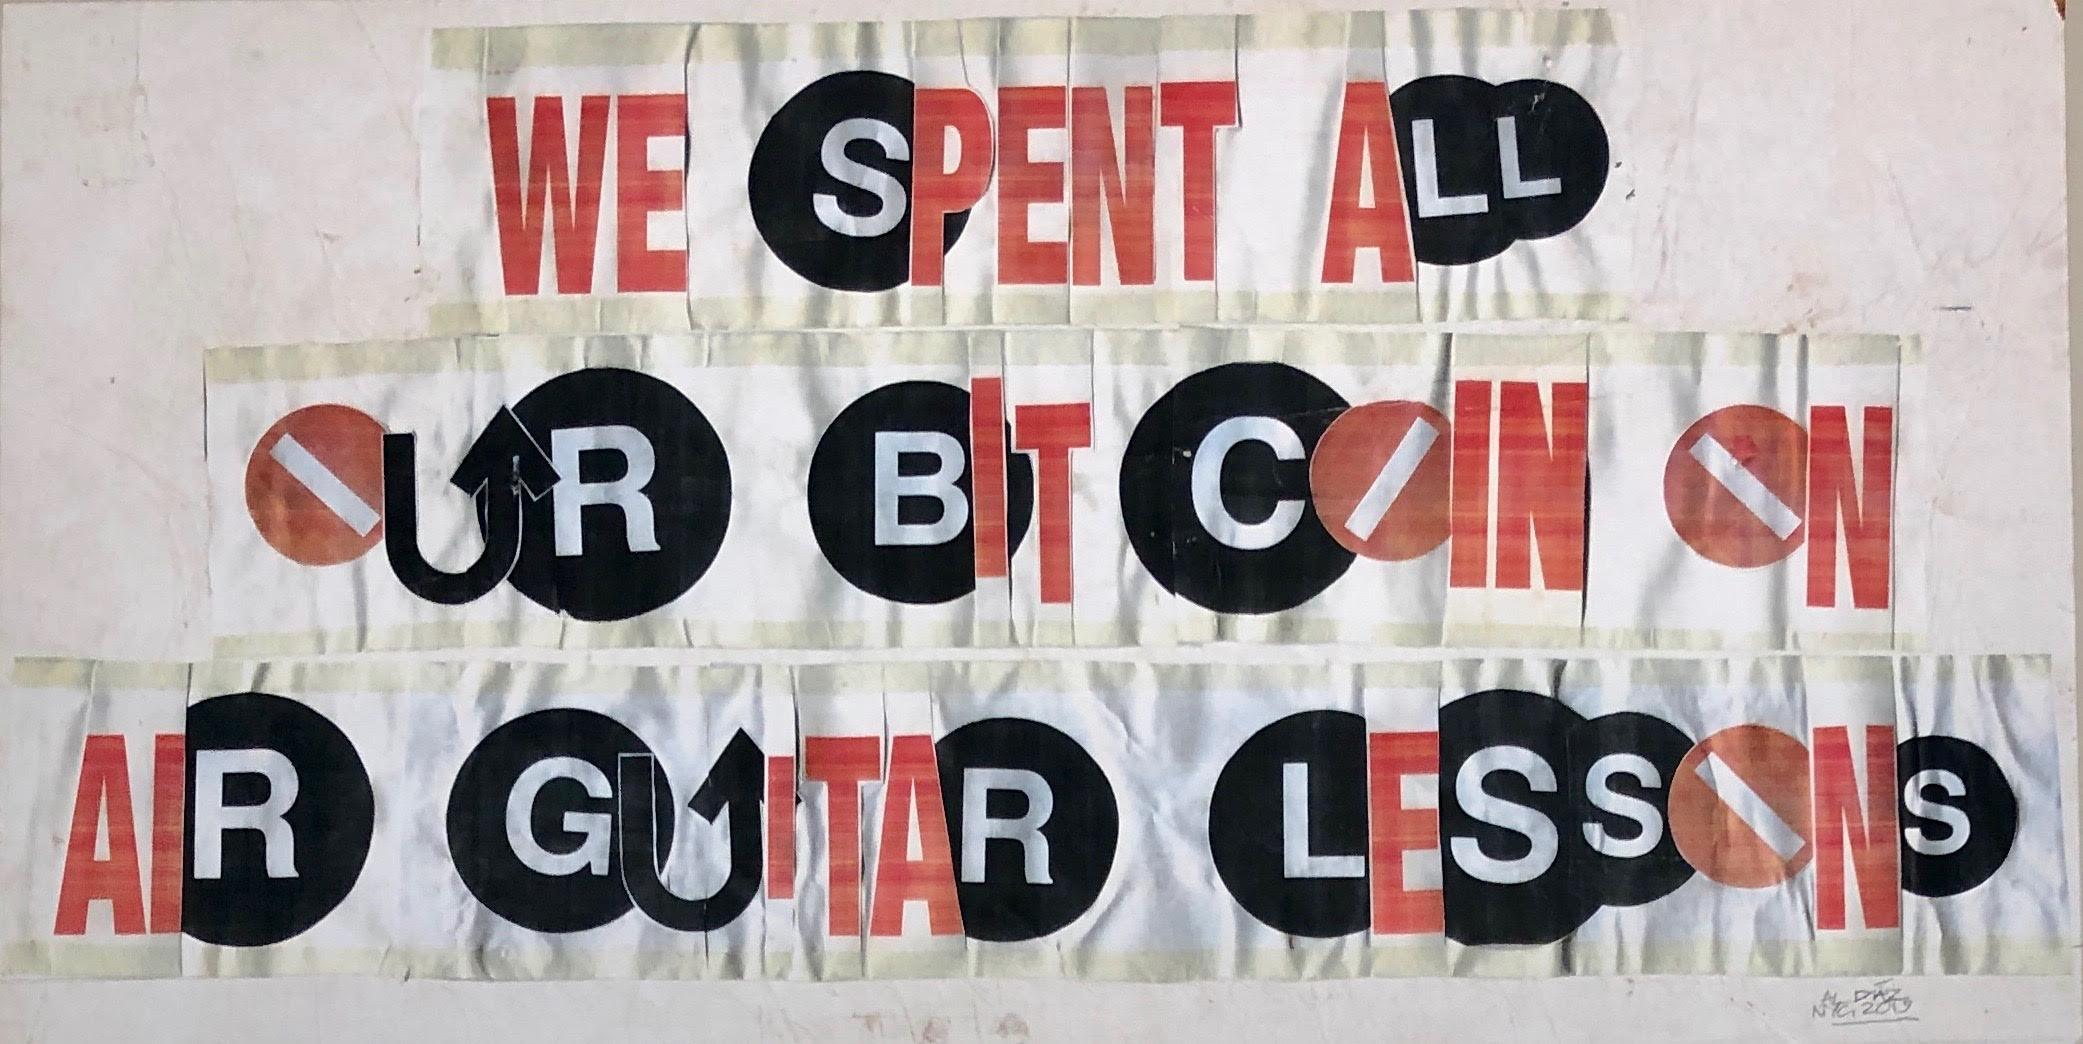 "We Spent All Our Bitcoin On Air Guitar Lessons" - Mixed Media Art by Al Diaz